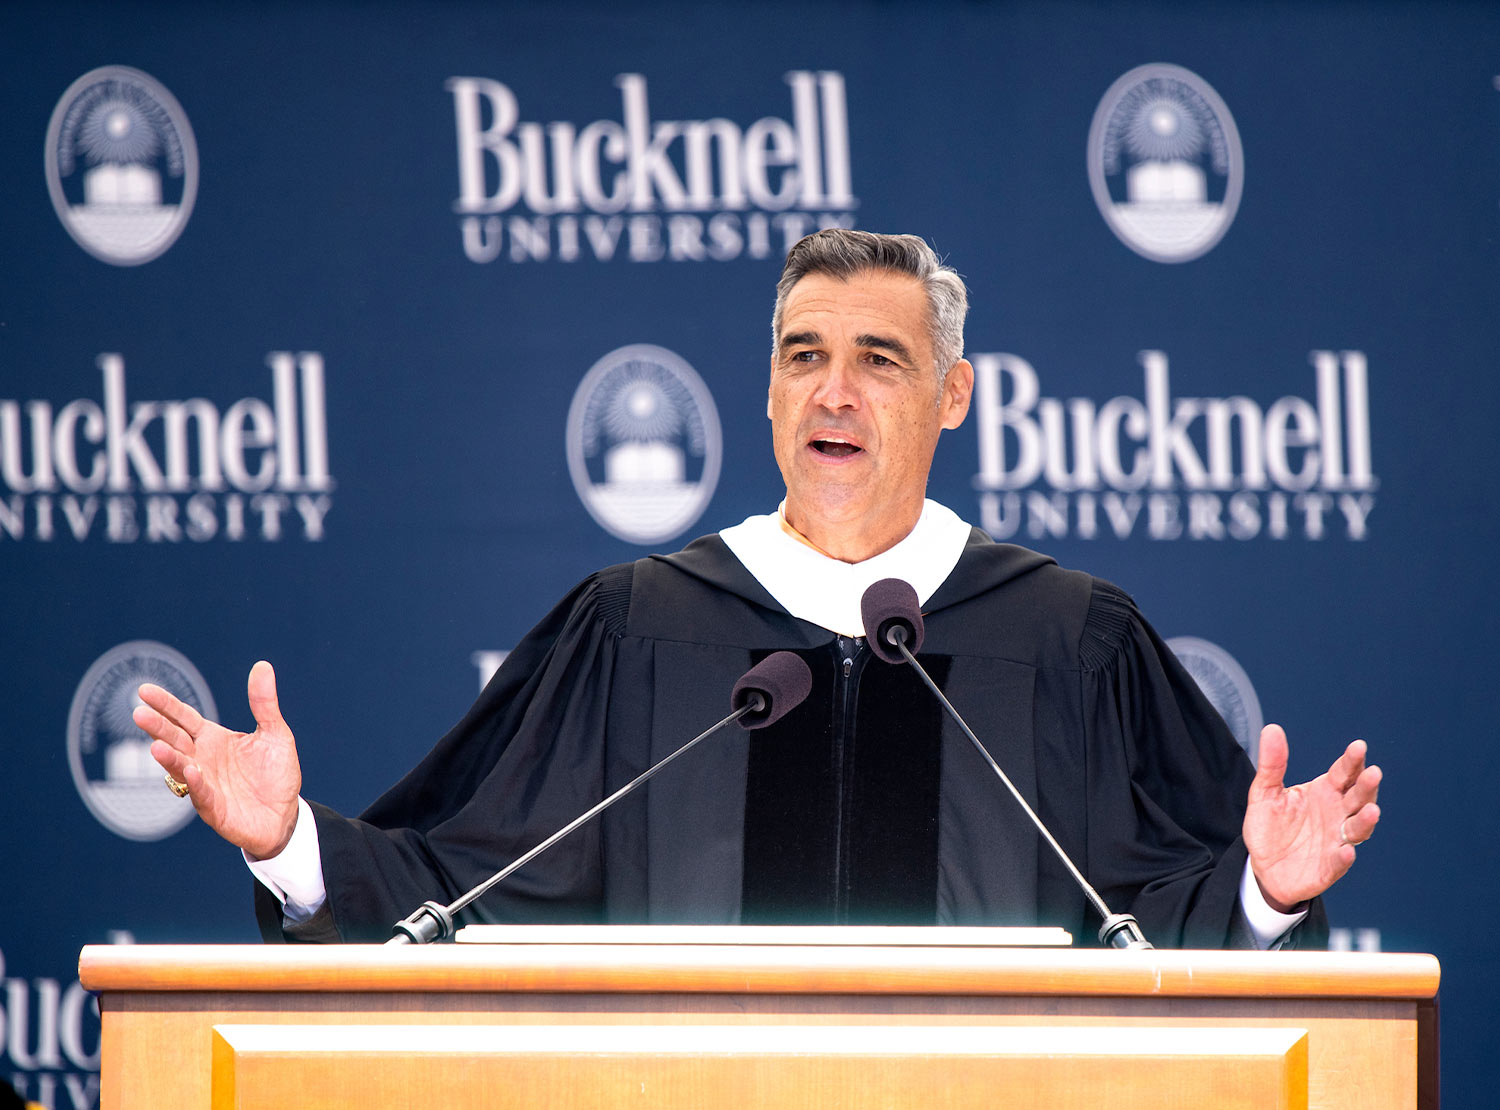 Jay Wright ’83 addresses the audience at the commencement ceremony